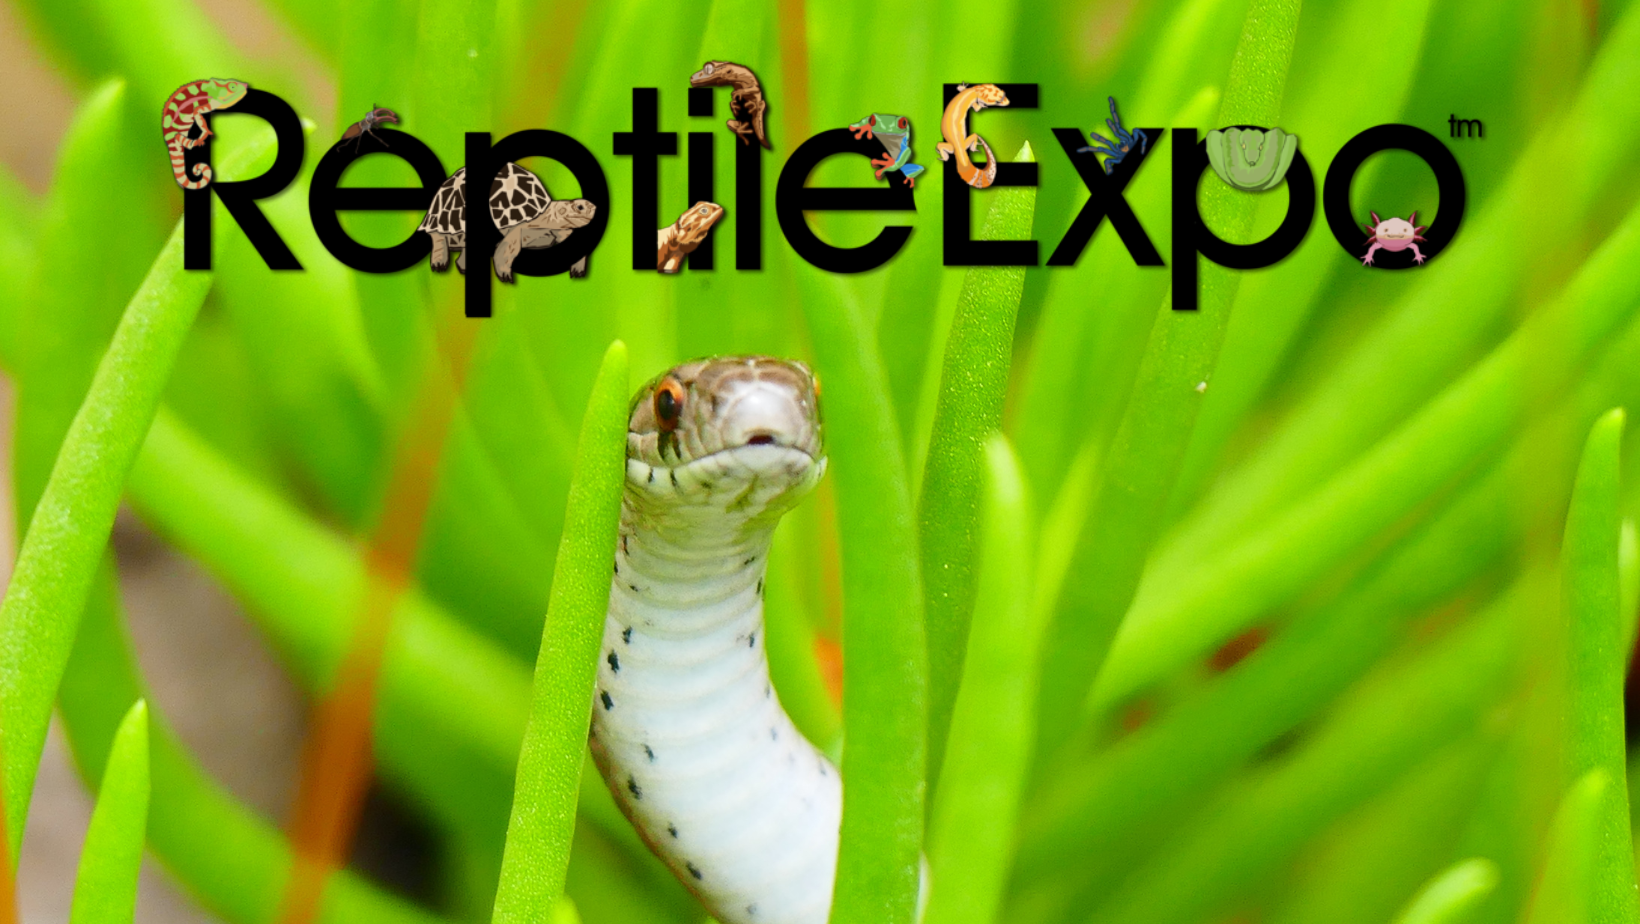 Win Tickets To The New Hampshire REPTILE EXPO At The Double Tree Hotel In Manchester!